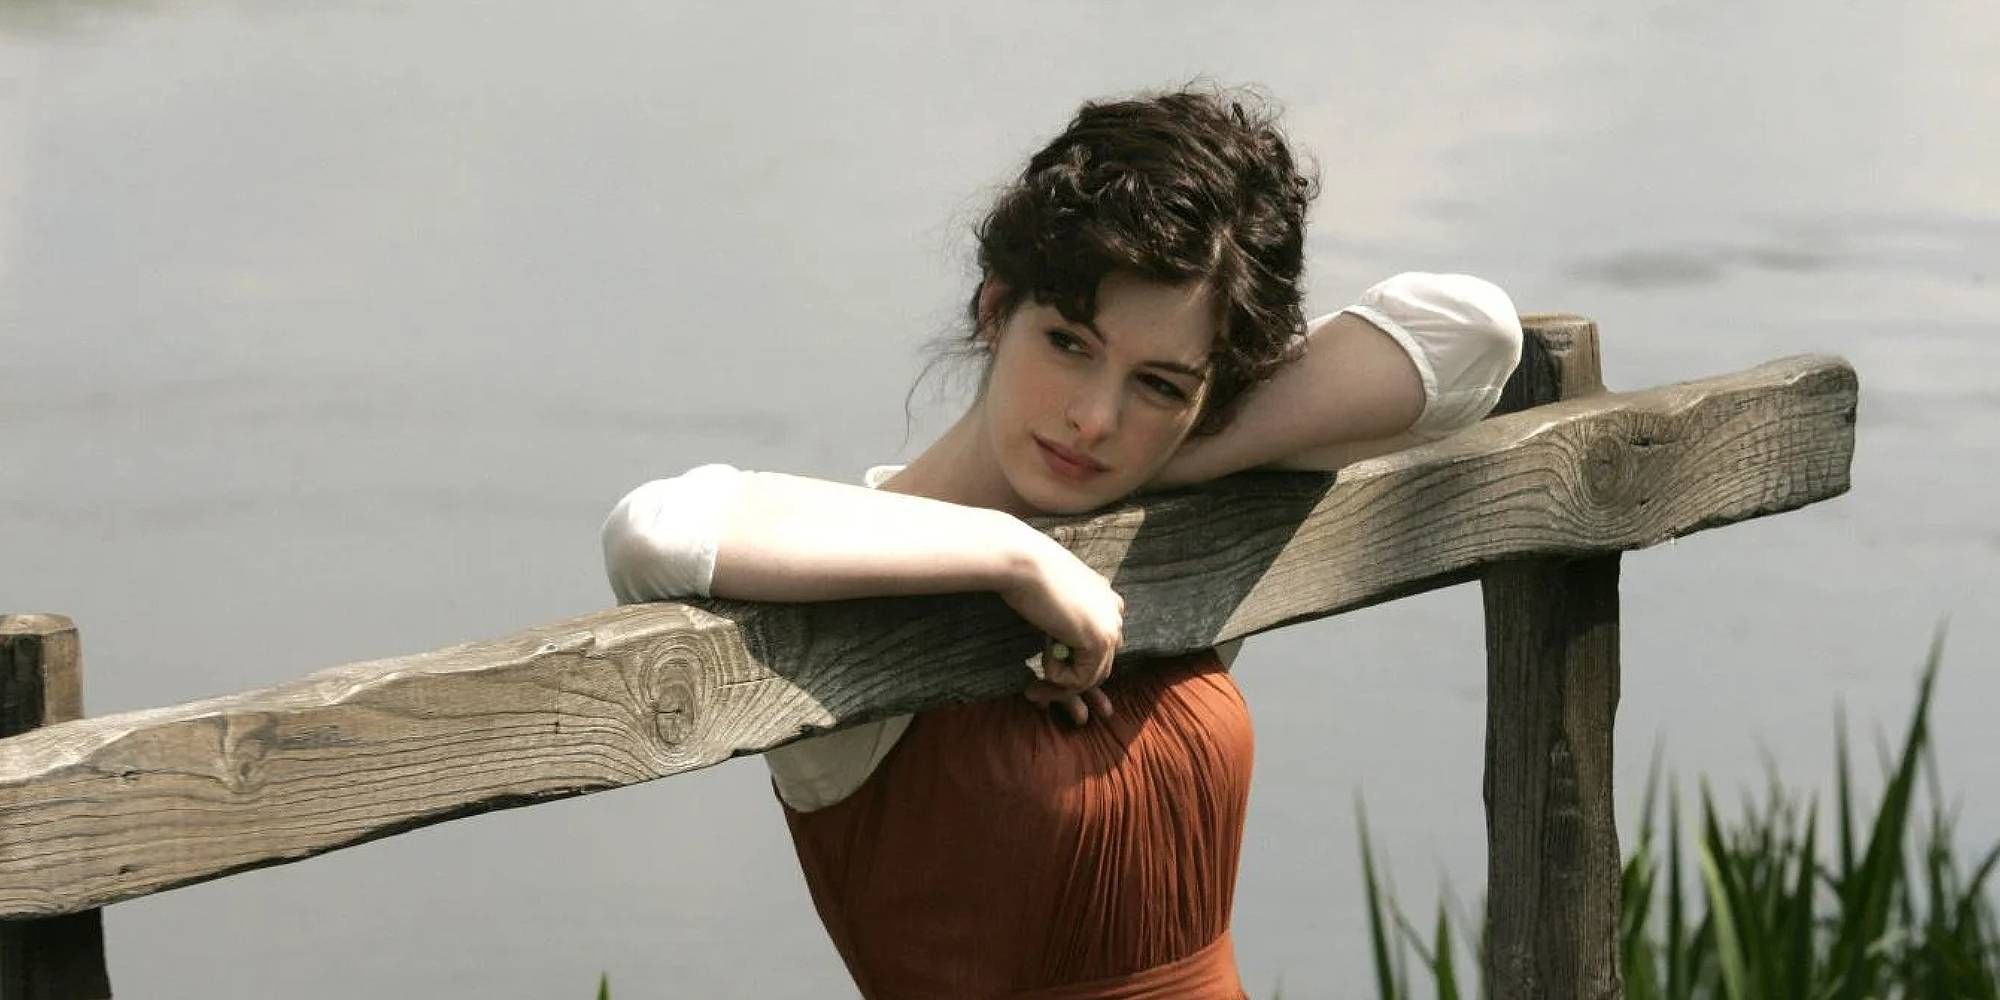 Anne Hathaway leaning on a wooden board in Becoming Jane.